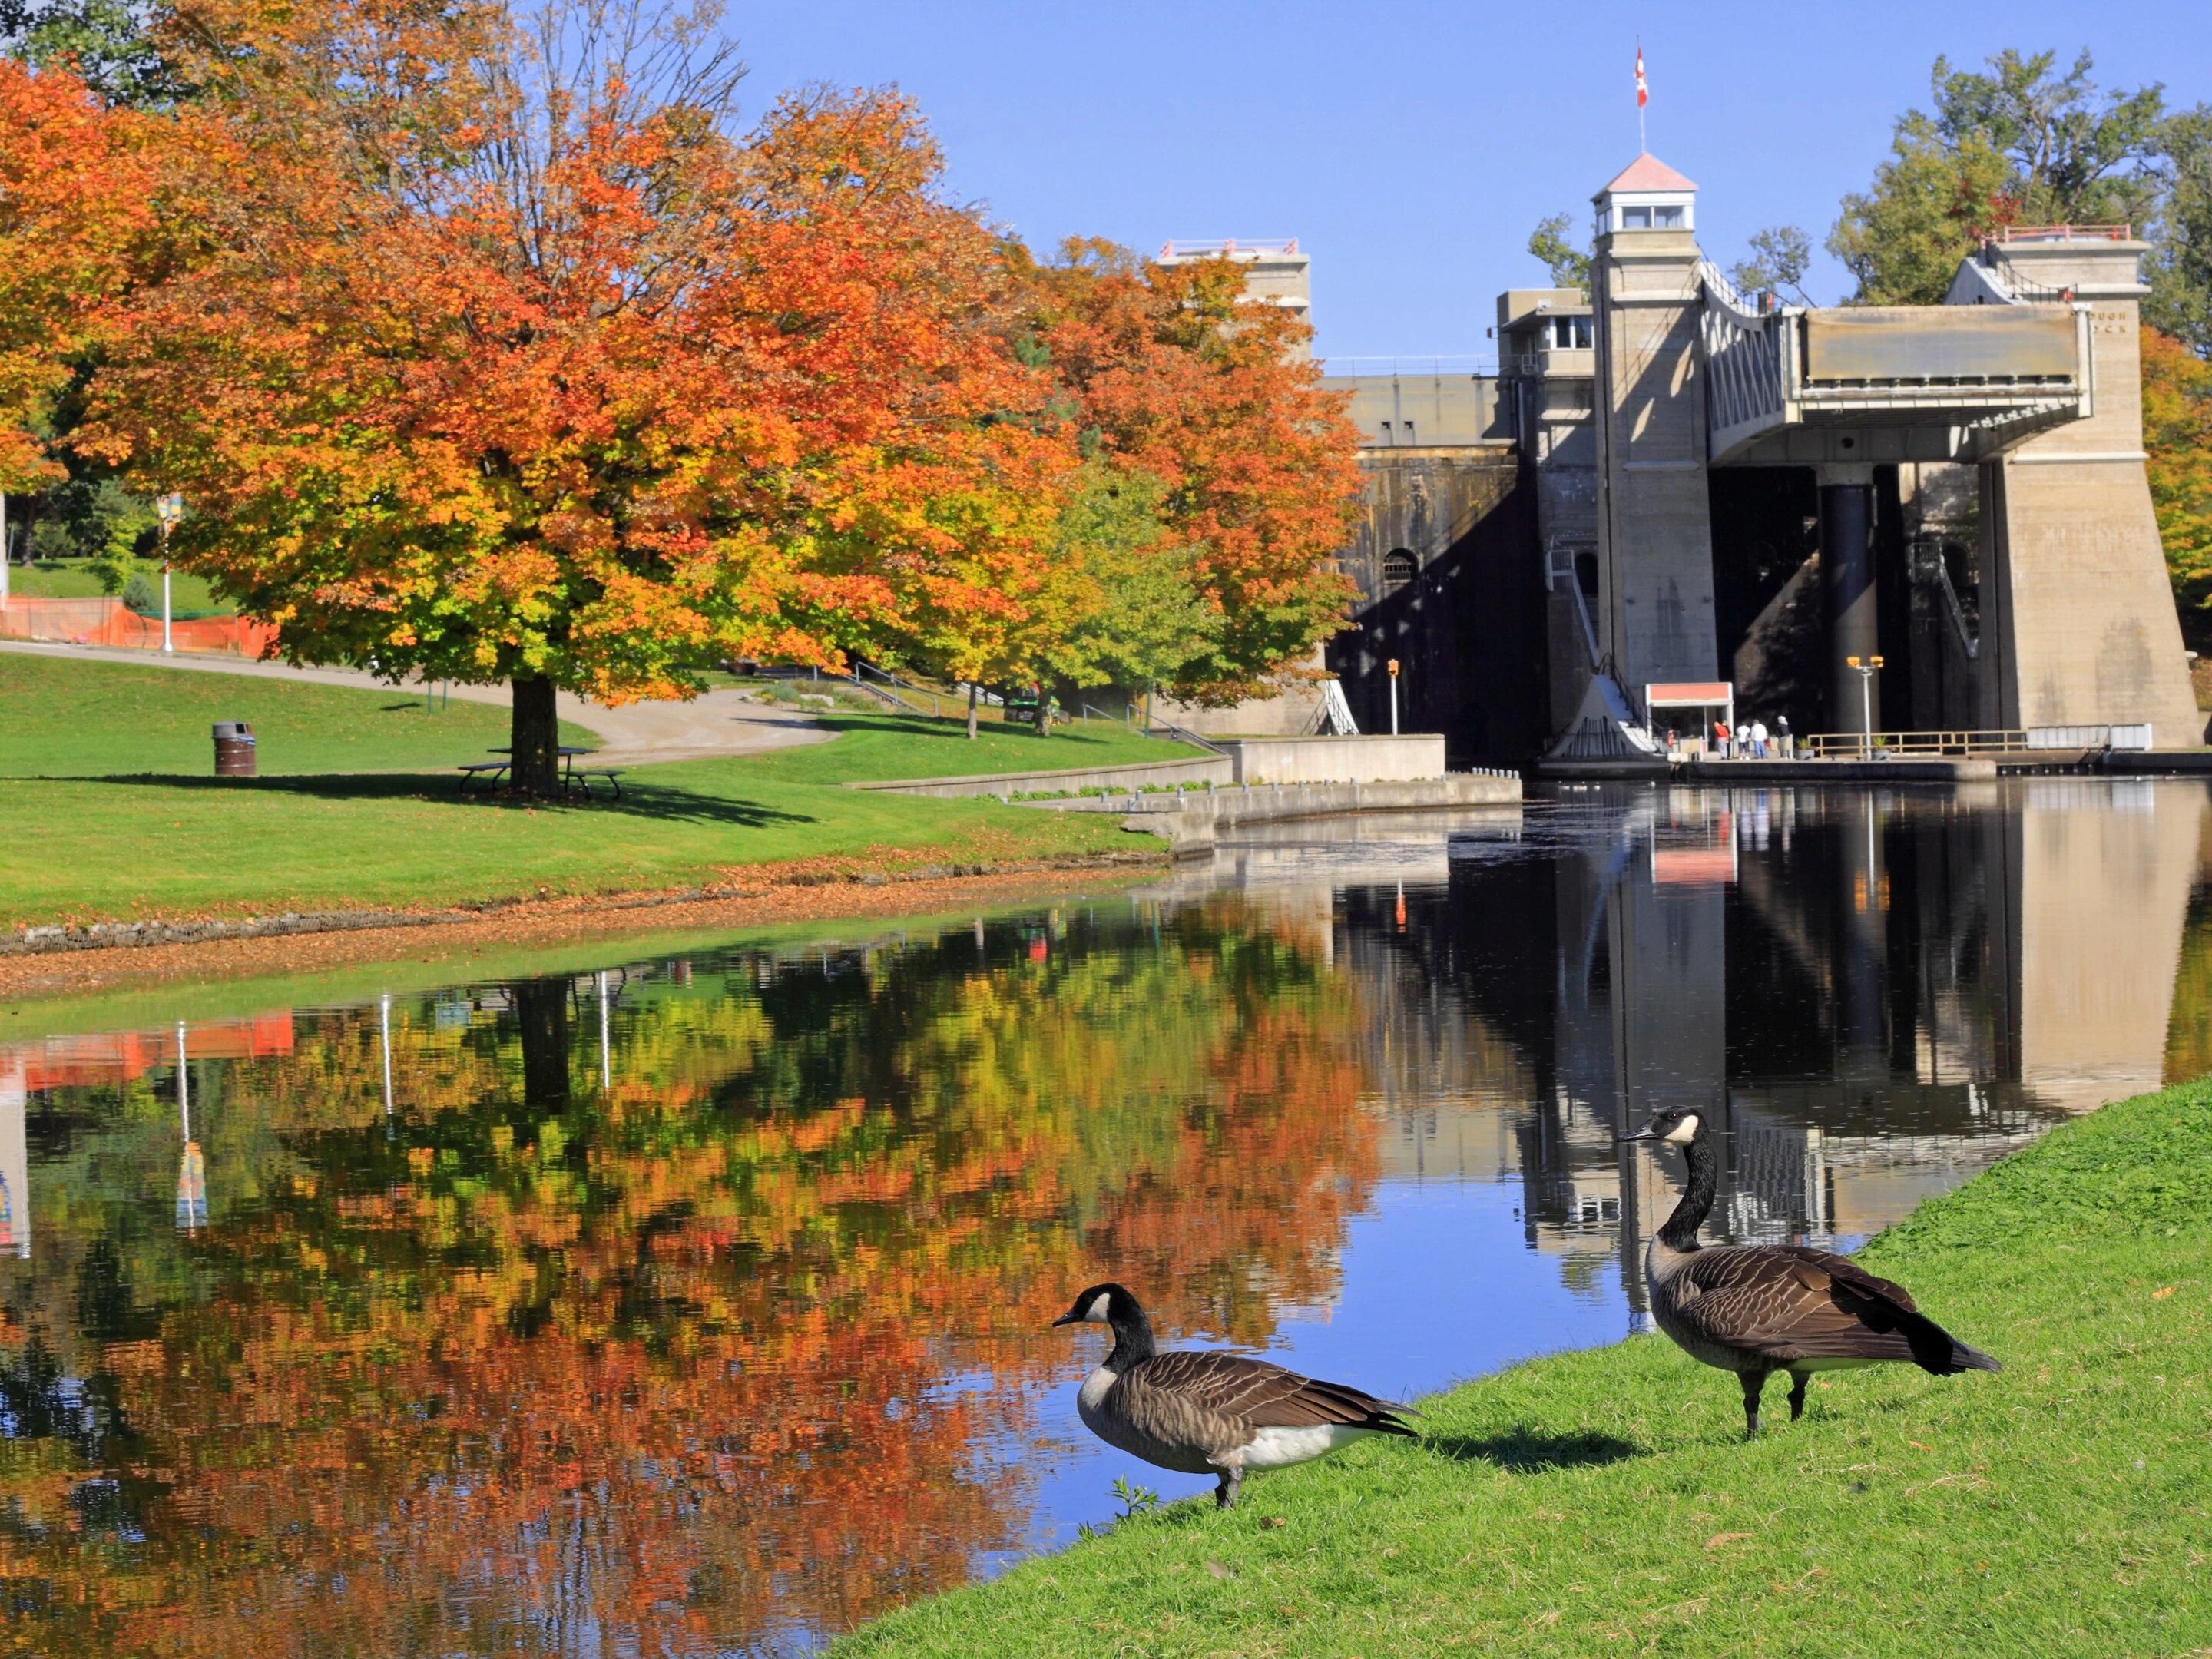 There are many exciting things to do around Peterborough!  Visit the Canadian Canoe Museum, Lang Pioneer Village, Peterborough Musicfest, Riverview Park and Zoo....and many other attractions!